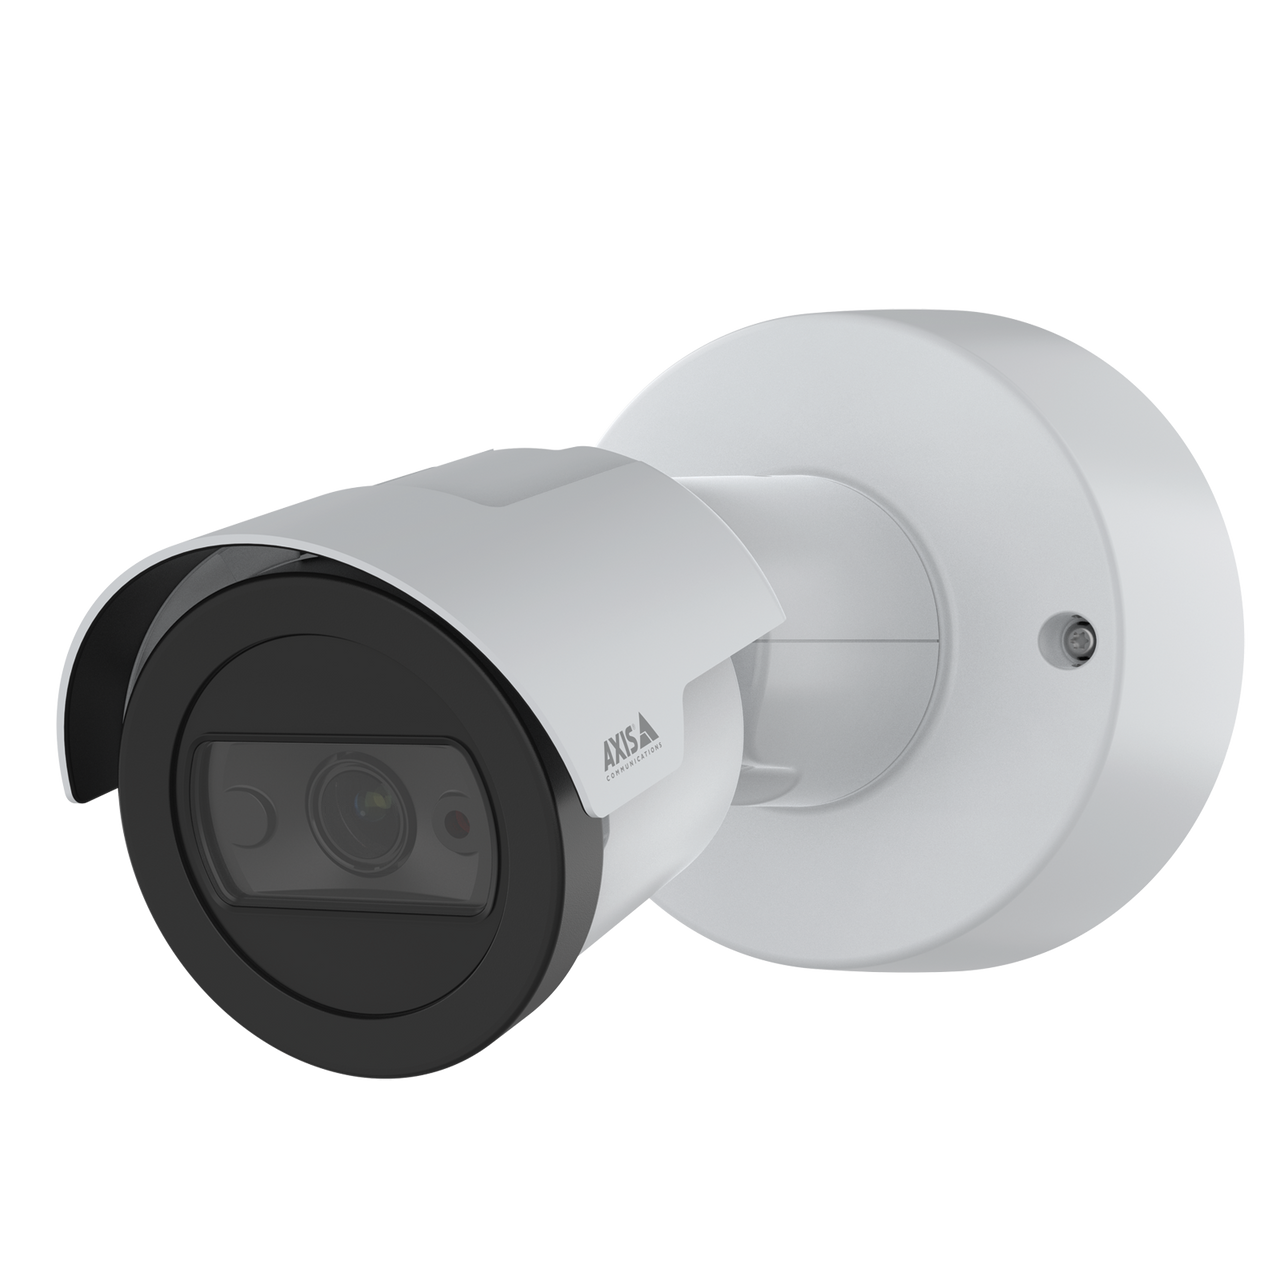 AXIS M2035-LE Black 2 MP affordable camera with deep learning